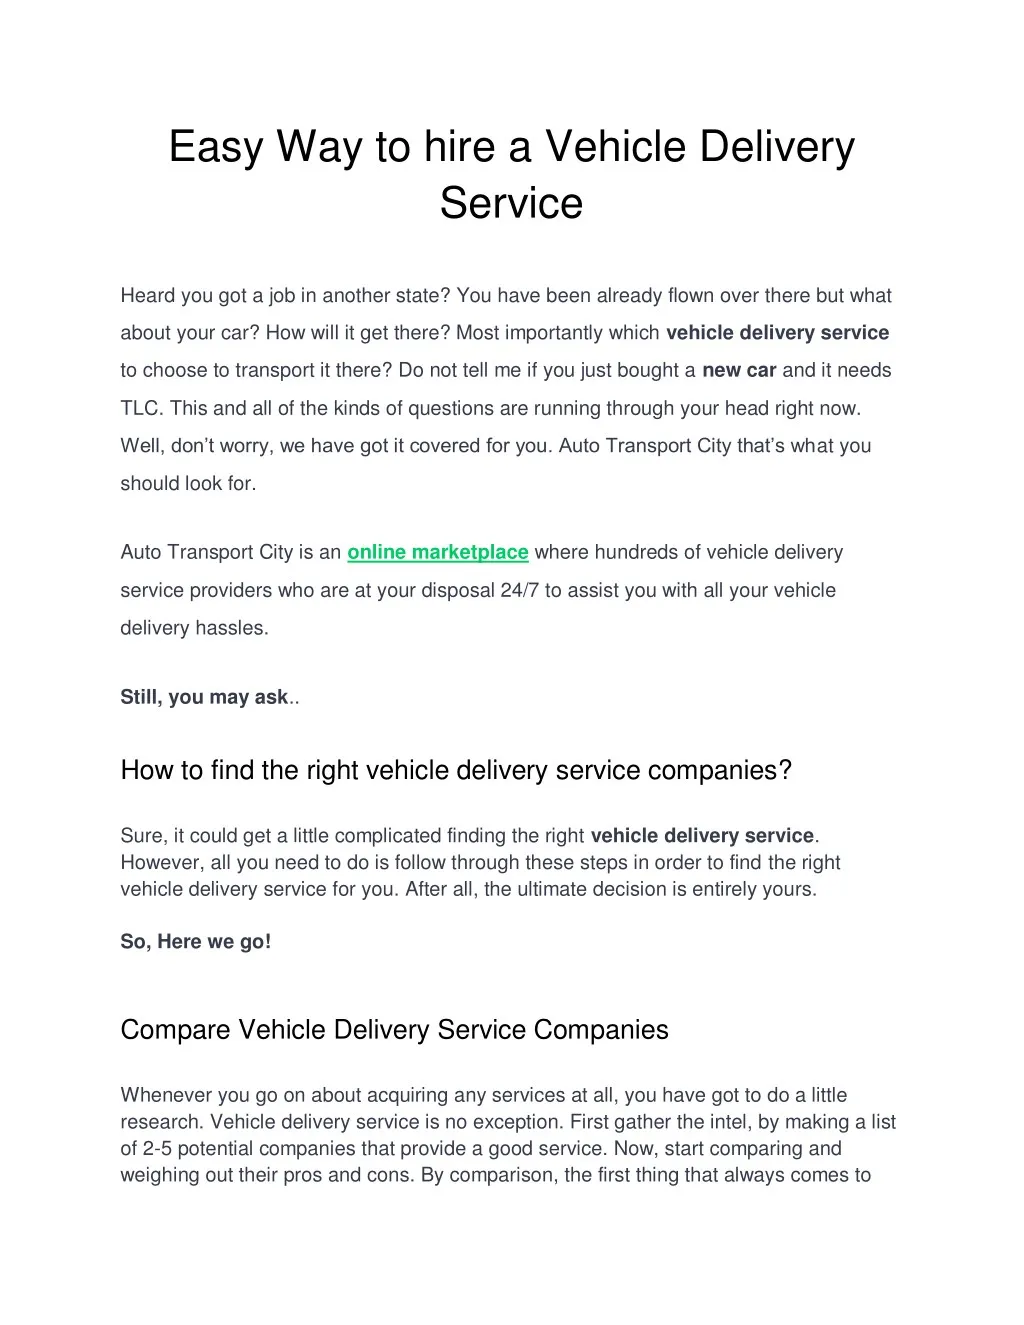 easy way to hire a vehicle delivery service